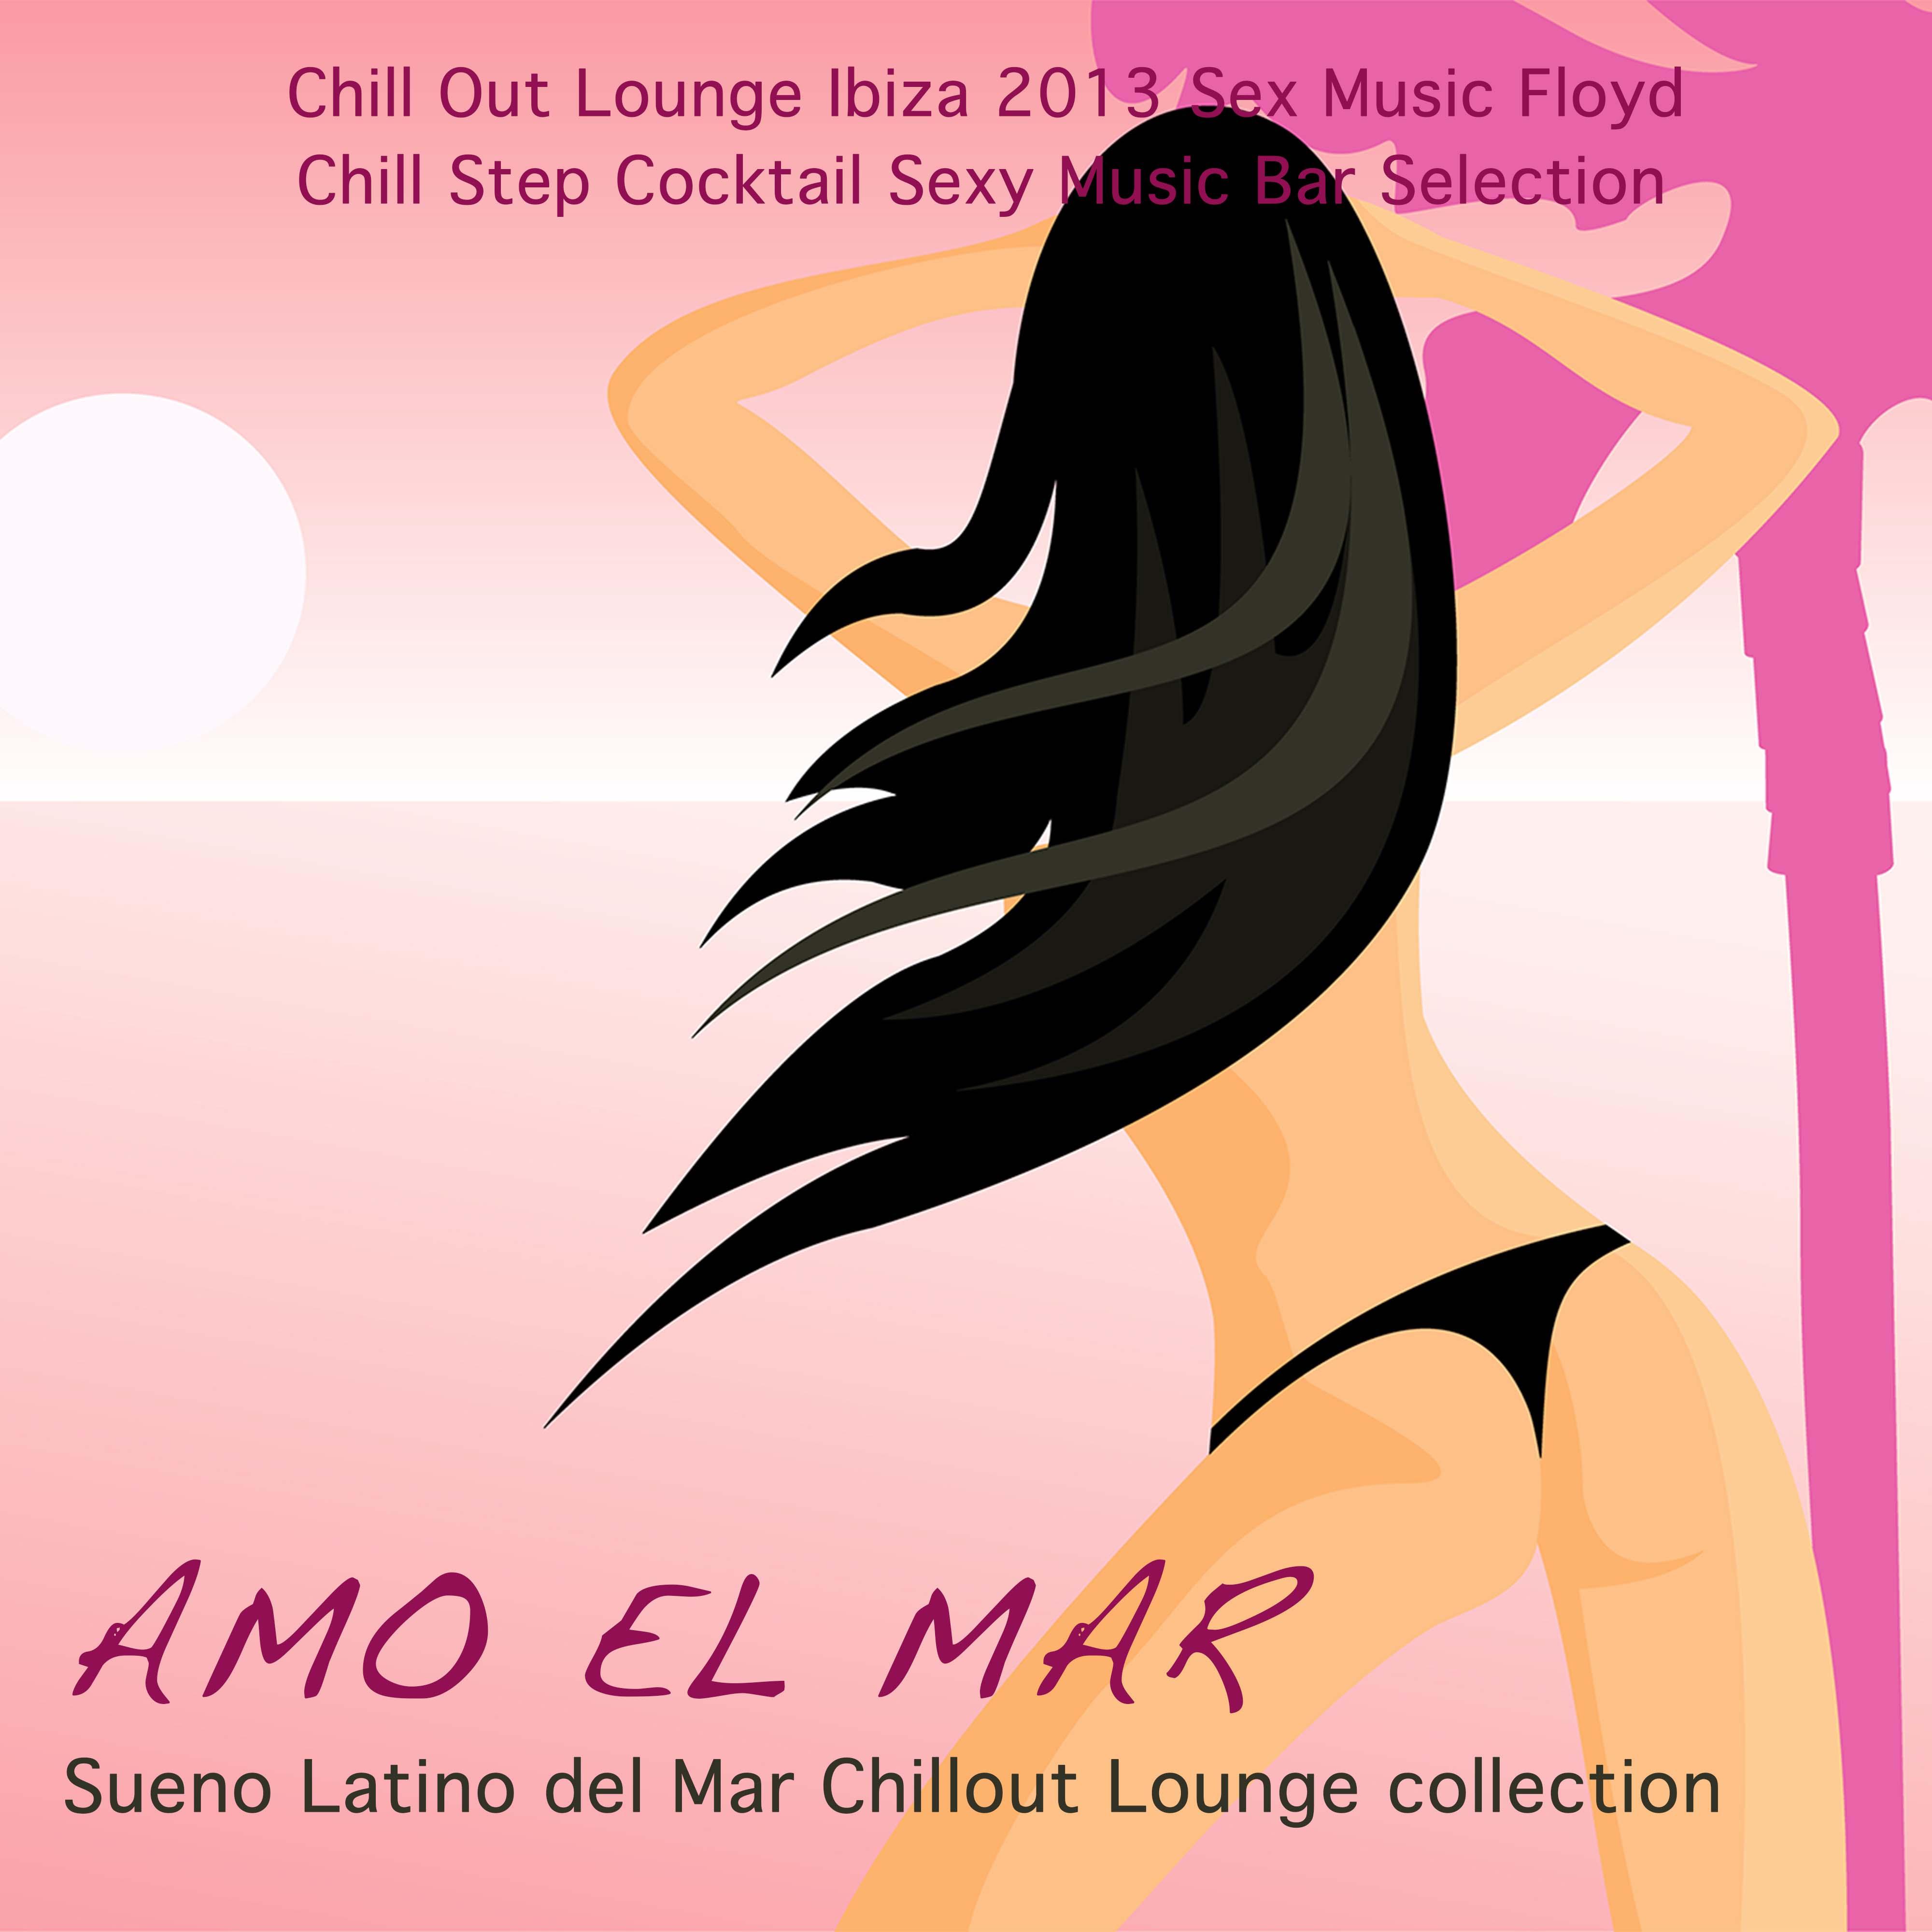 Amo el Mar: Chill Out Lounge Ibiza 2013 *** Music Floyd & Chill Step Cocktail **** Music Bar Selection (Sueno Latino del Mar Chillout Lounge collection)